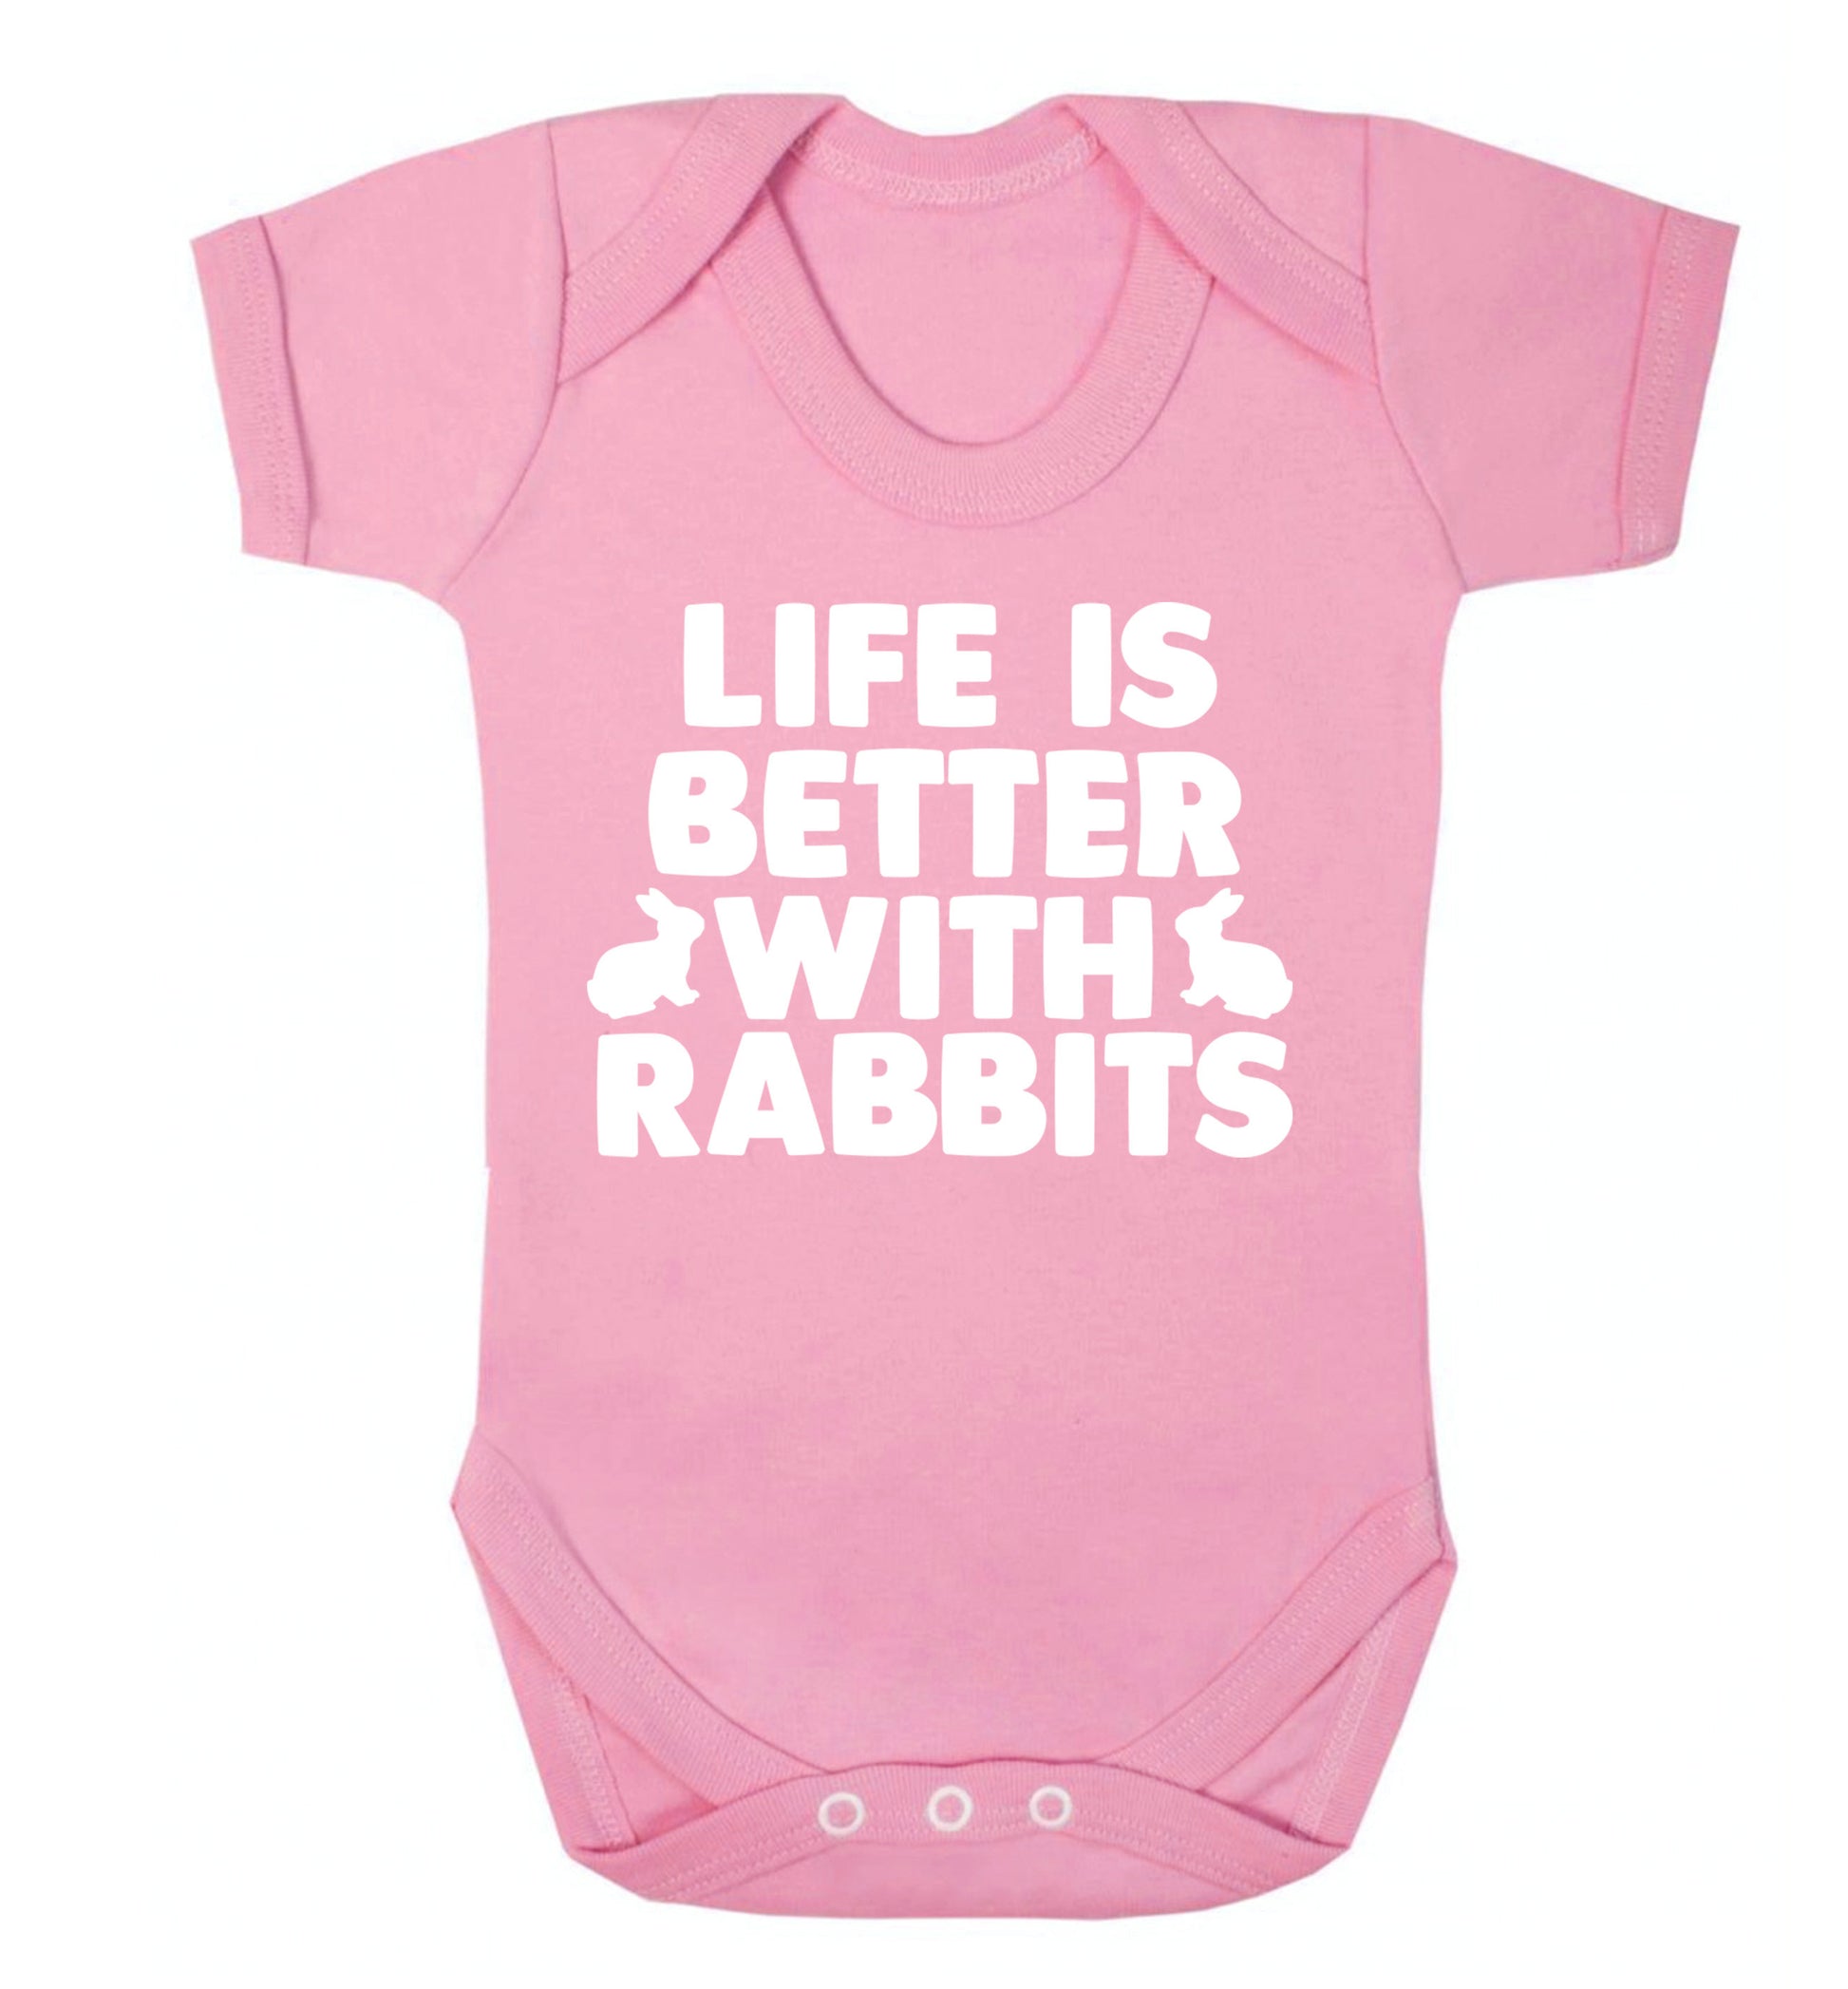 Life is better with rabbits Baby Vest pale pink 18-24 months